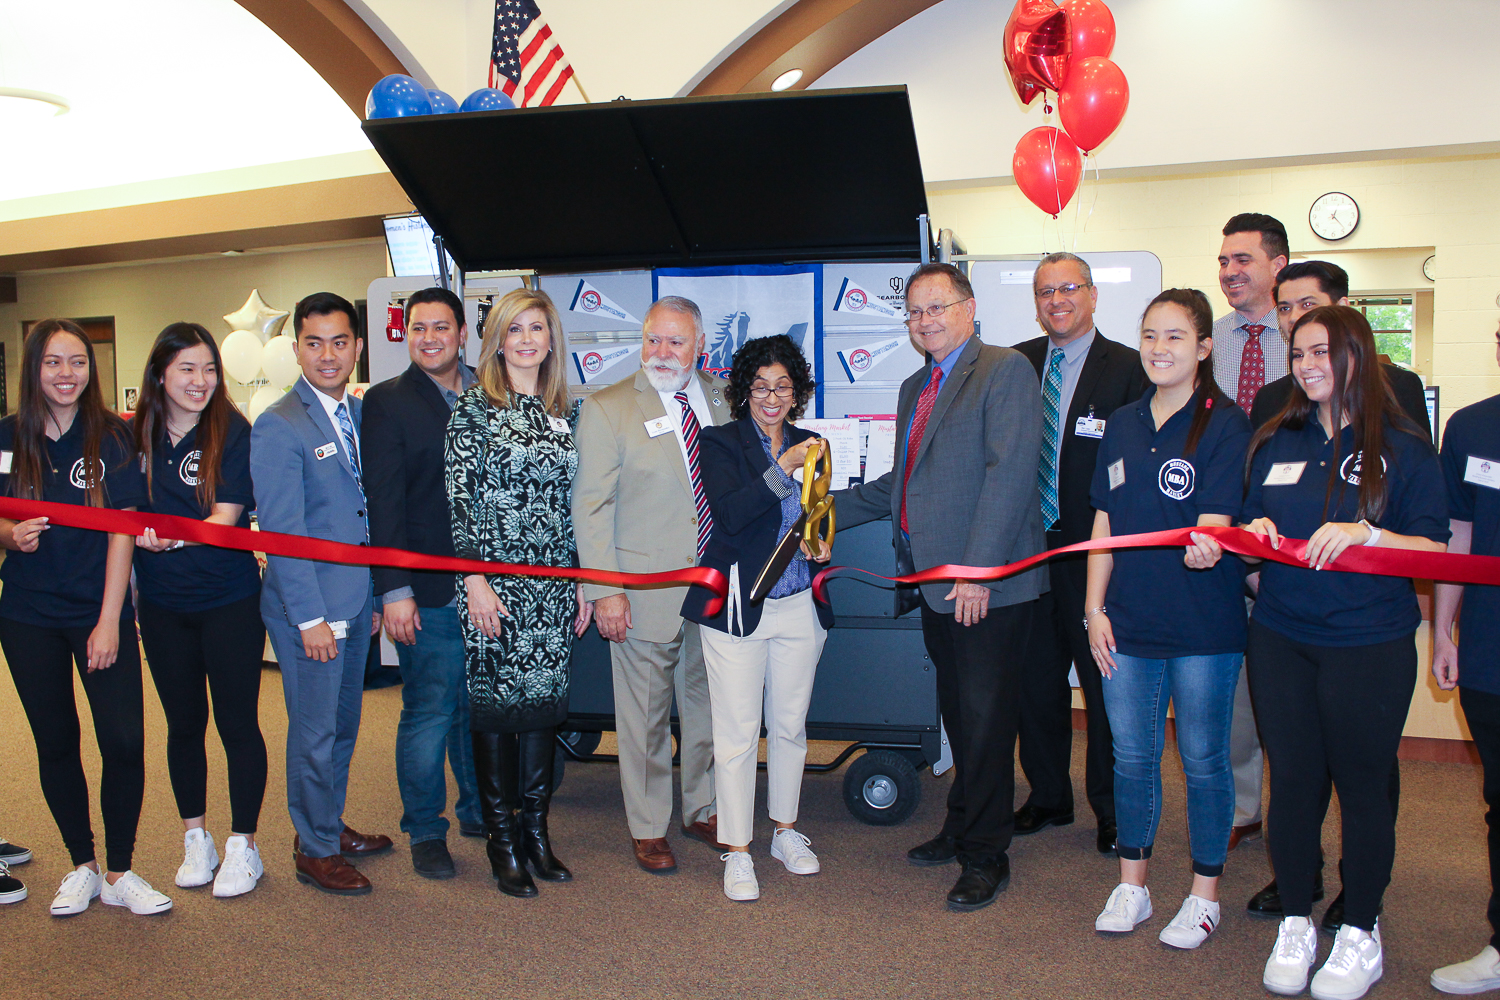 Mustang Market Ribbon Cutting Ceremony featuring students, teachers, administrators, and community representatives.